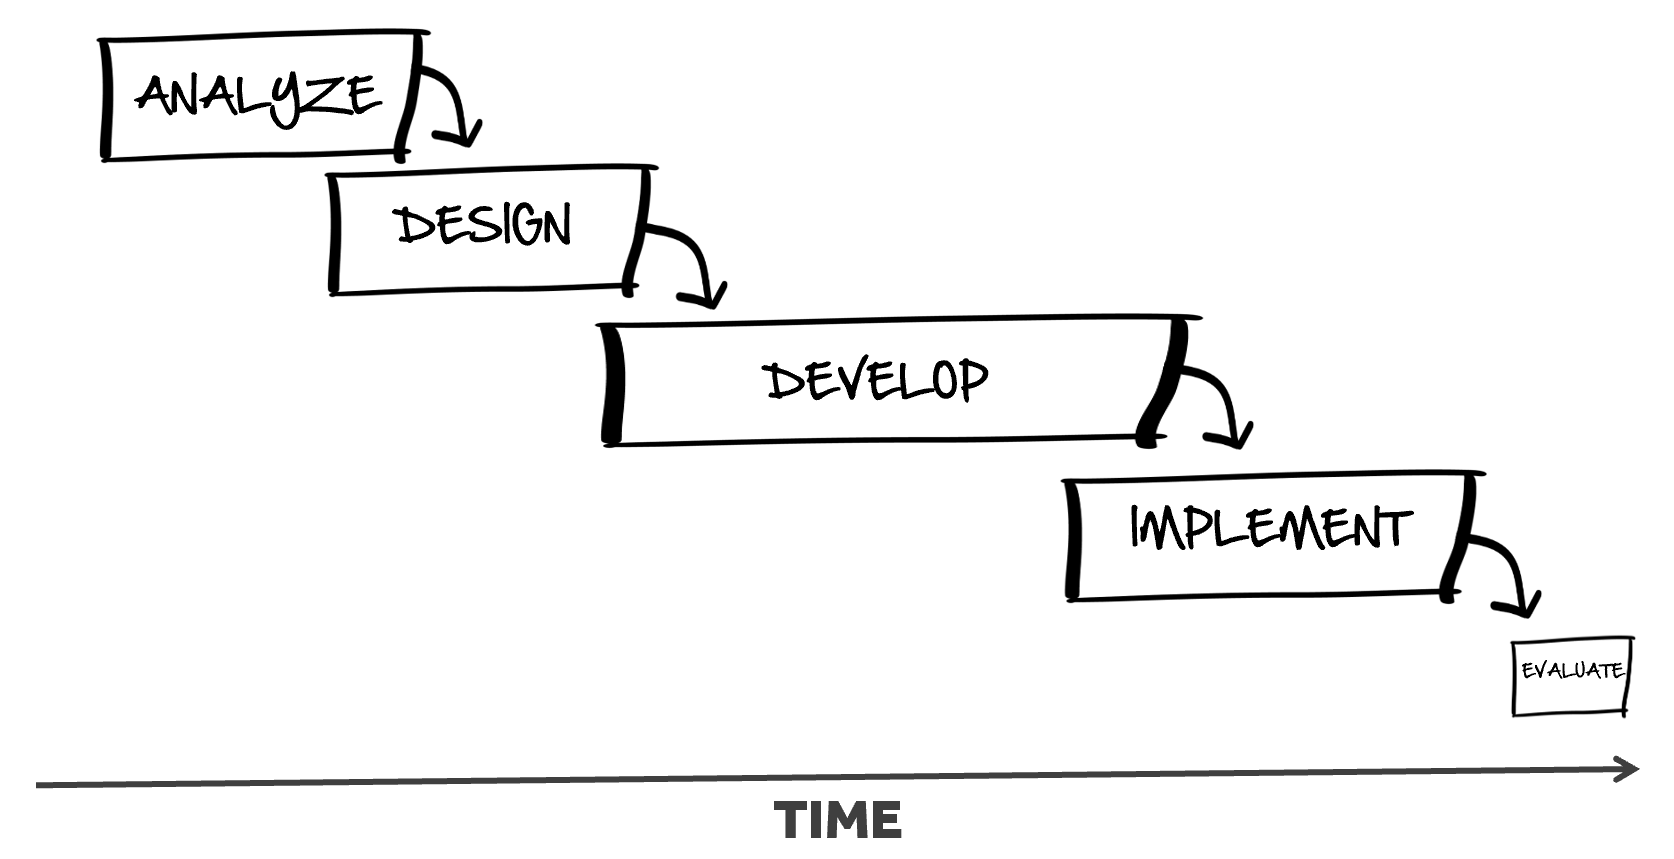 The ADDIE process is sequential, moving from the Analyze stage, through Design, Develop, and Implement before arriving at Evaluate